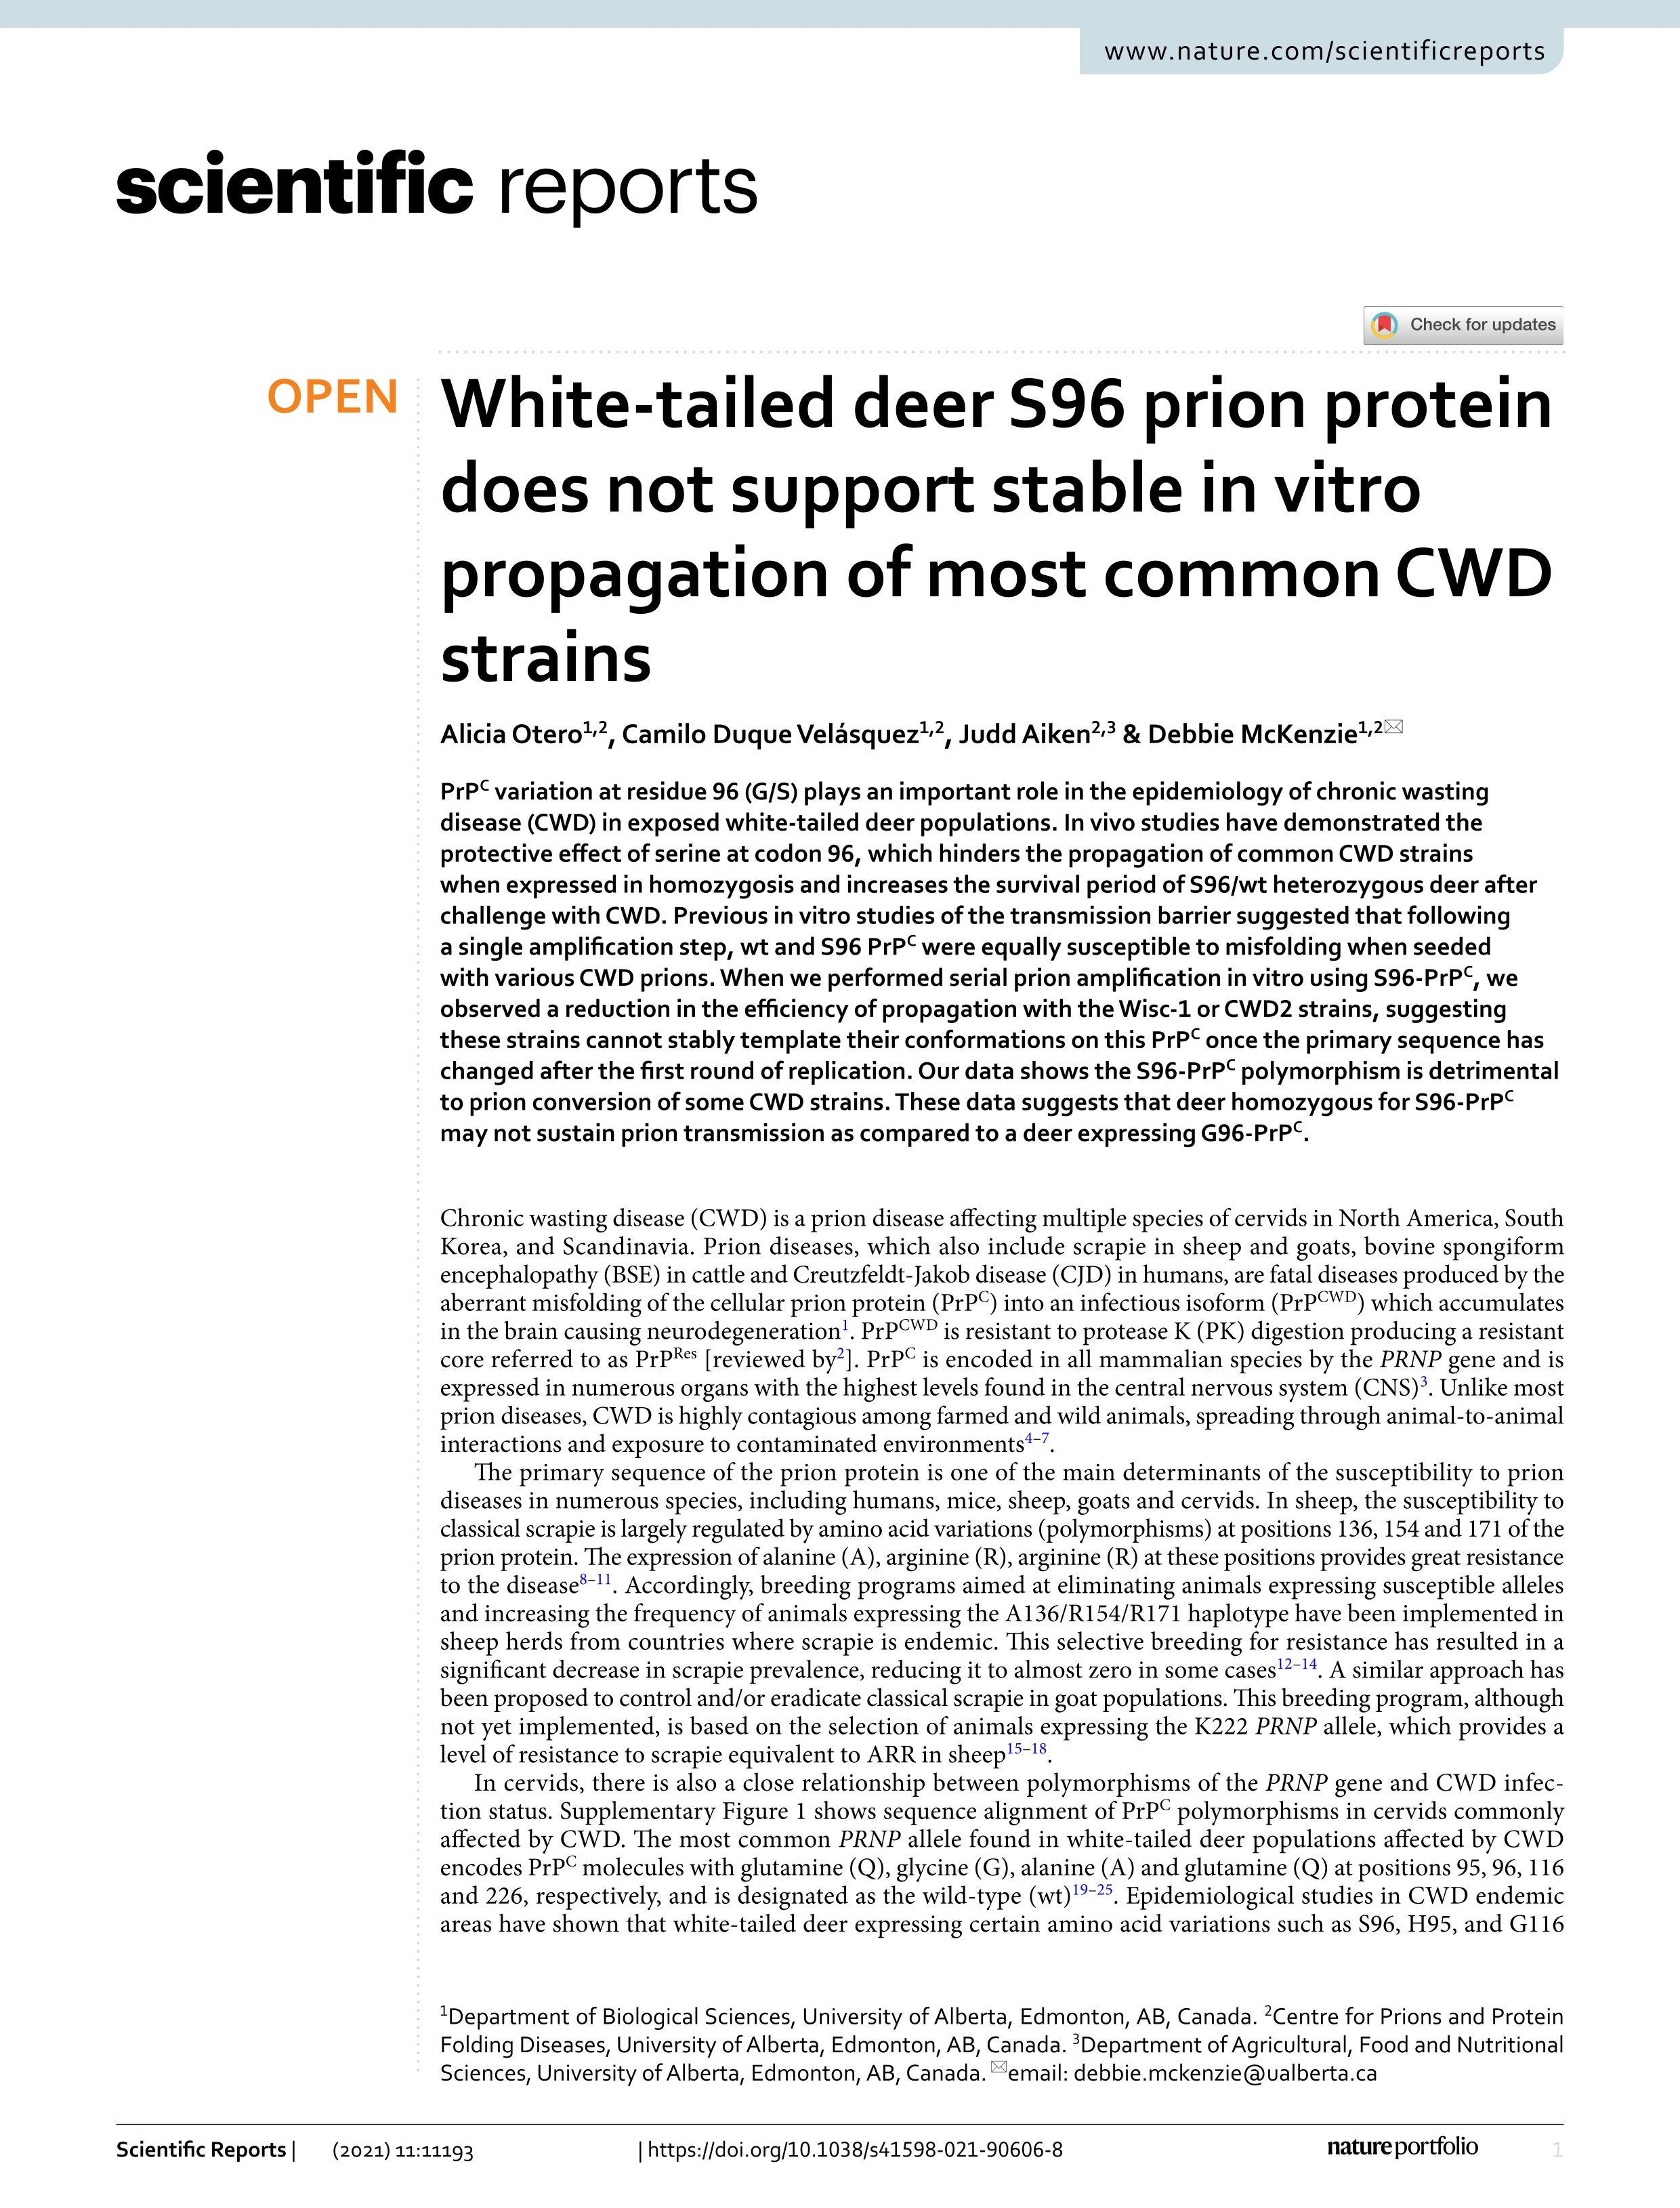 White-tailed deer S96 prion protein does not support stable in vitro propagation of most common CWD strains